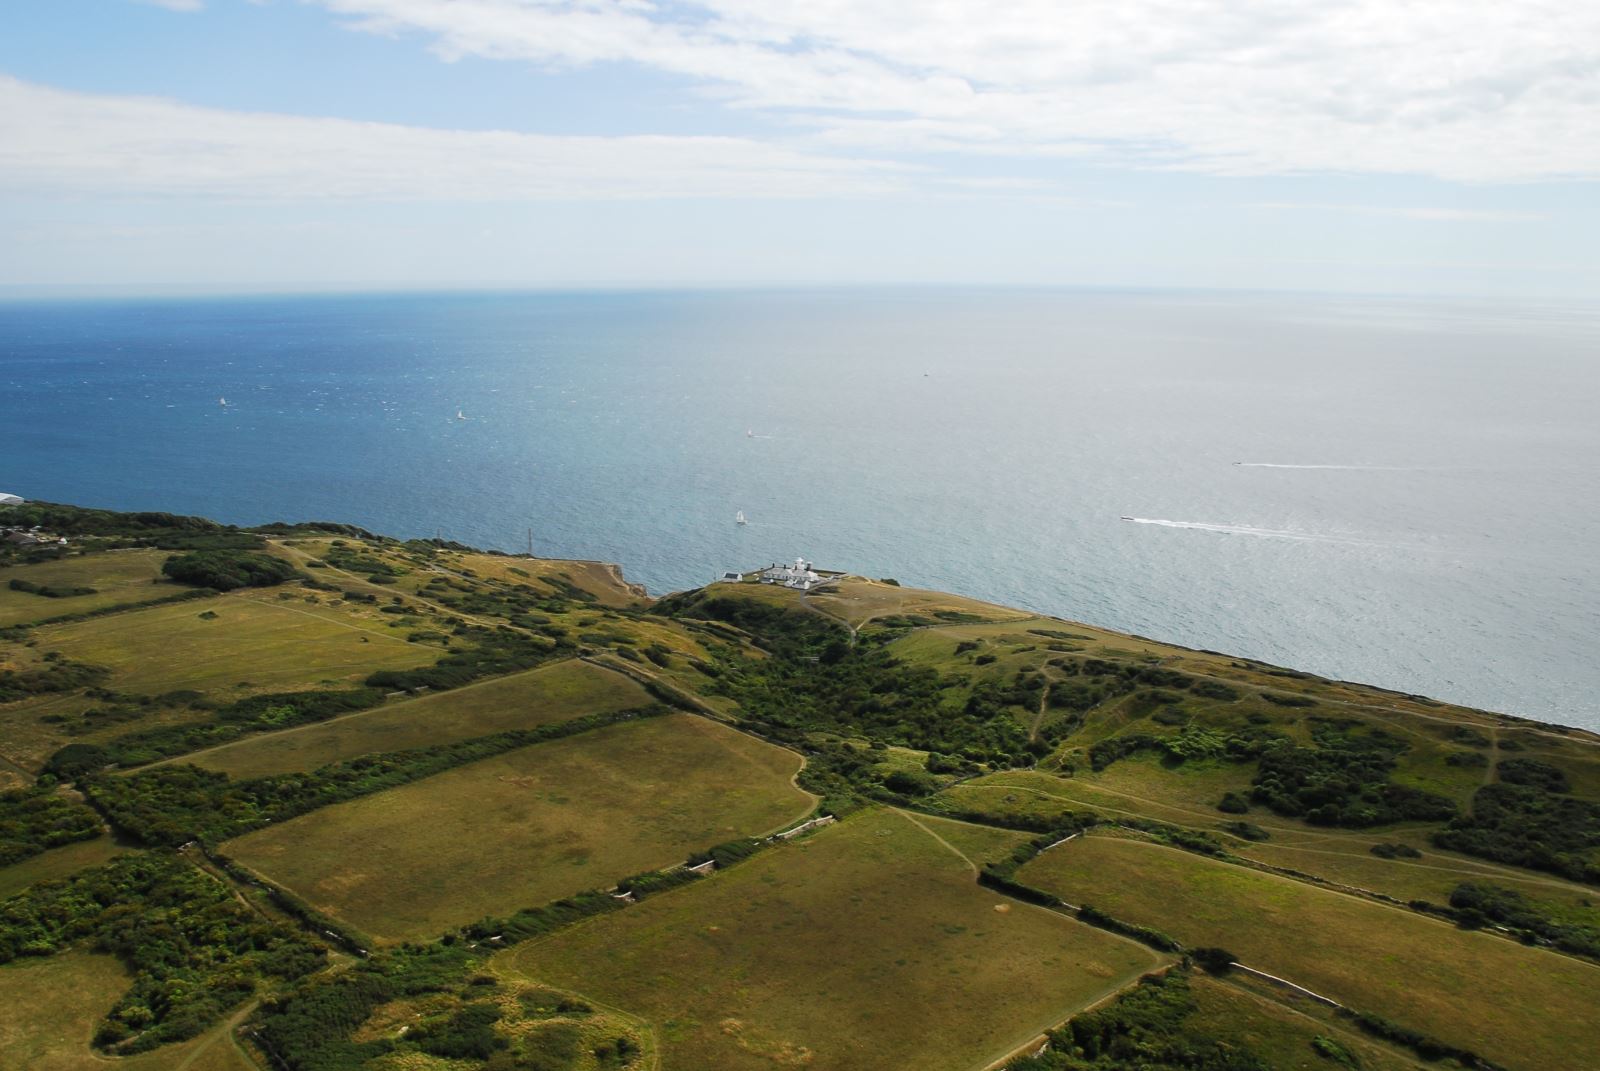 Durlston from the air